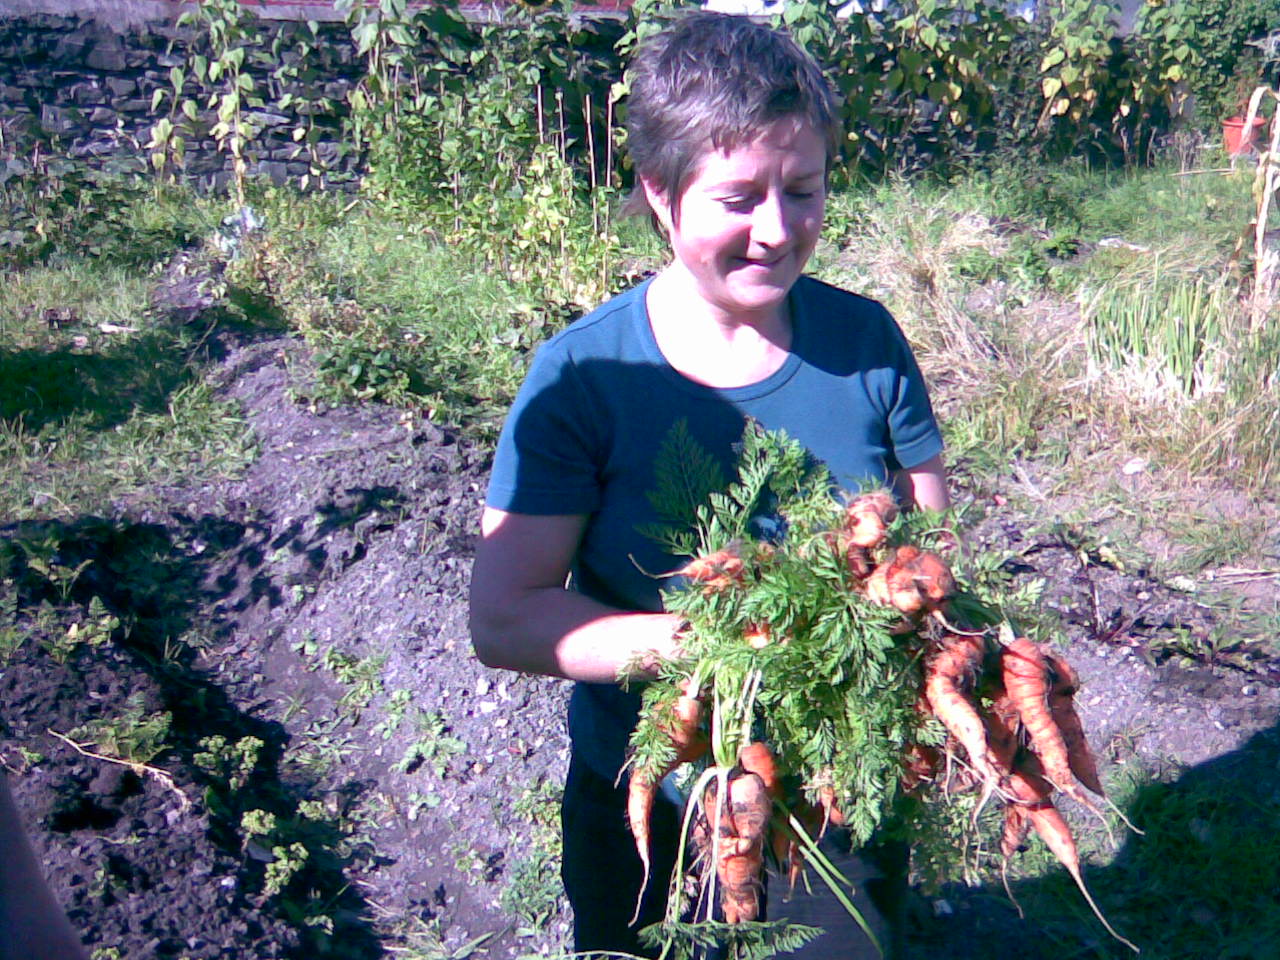 [Berrit+with+a+harvest+of+carrots.jpg]